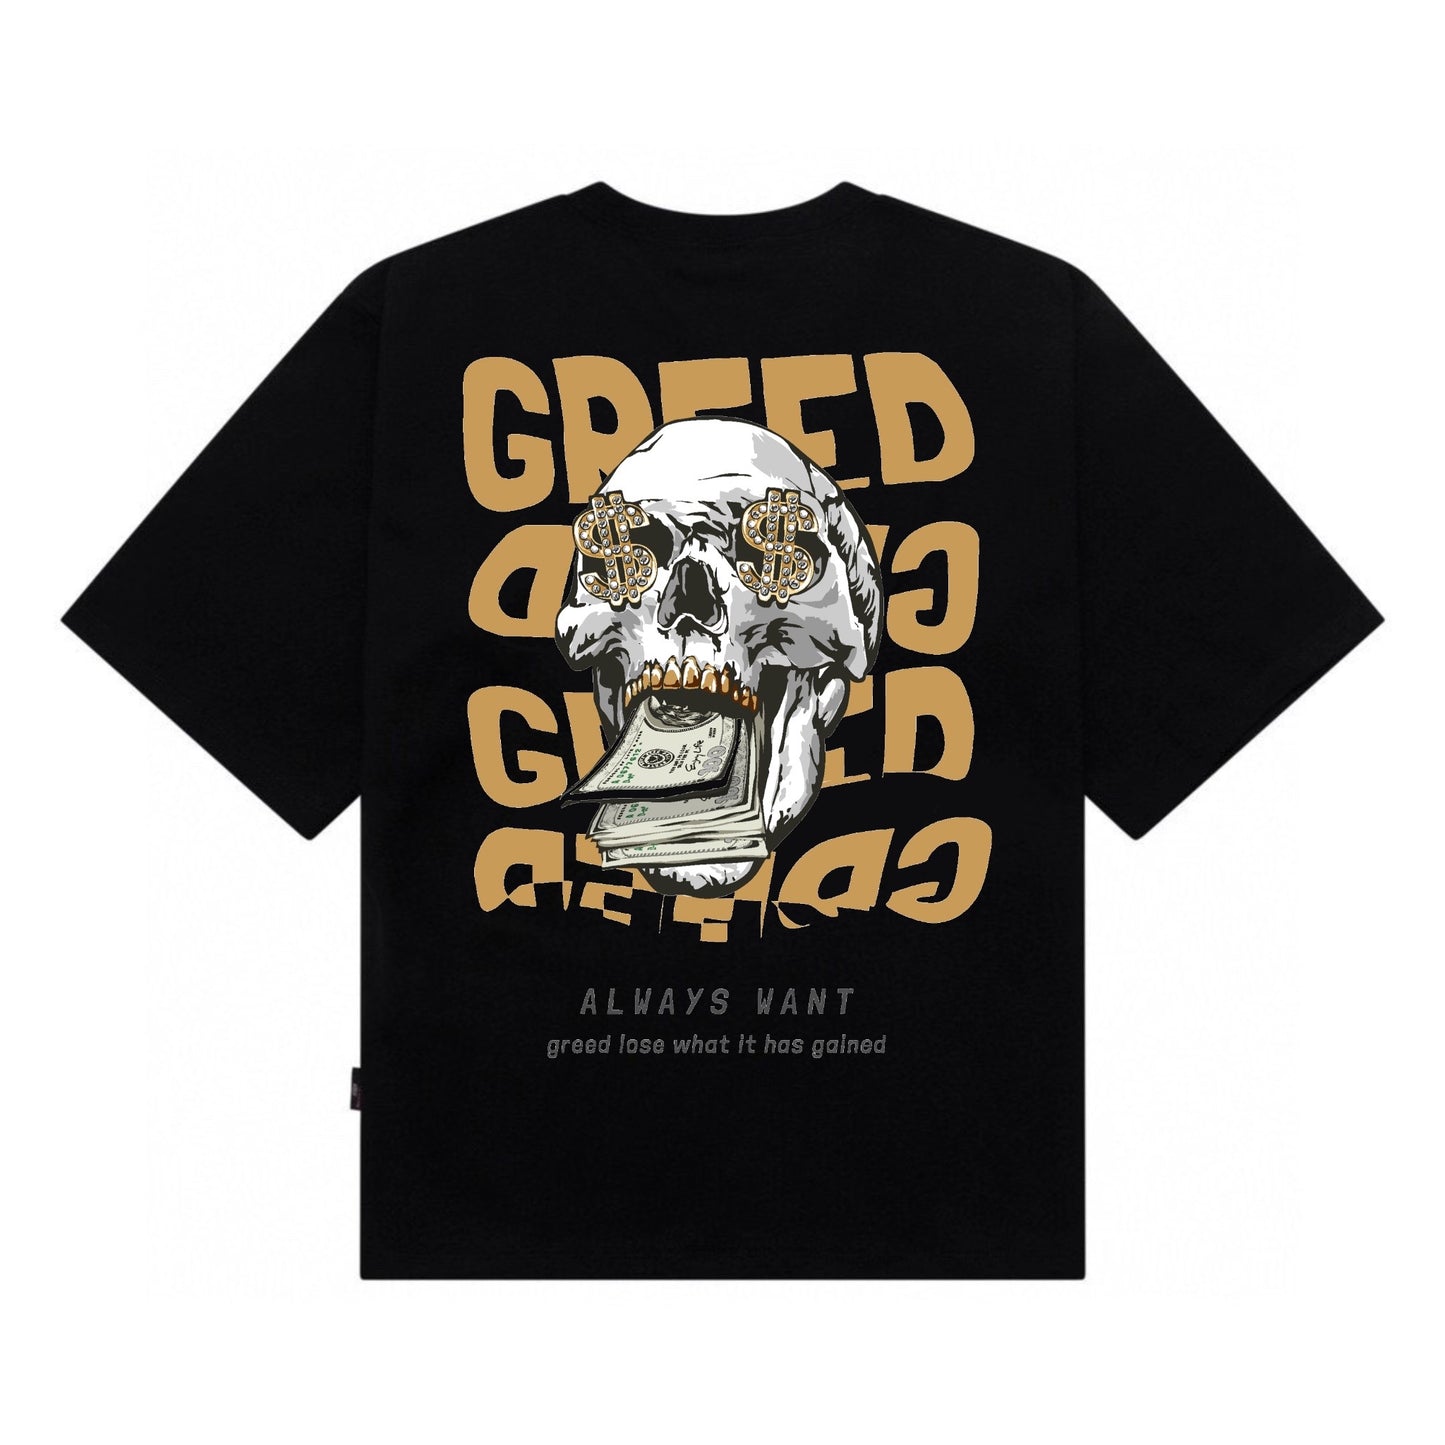 Etiquette Oversized T-Shirt - [0082] Greed Greed Greed